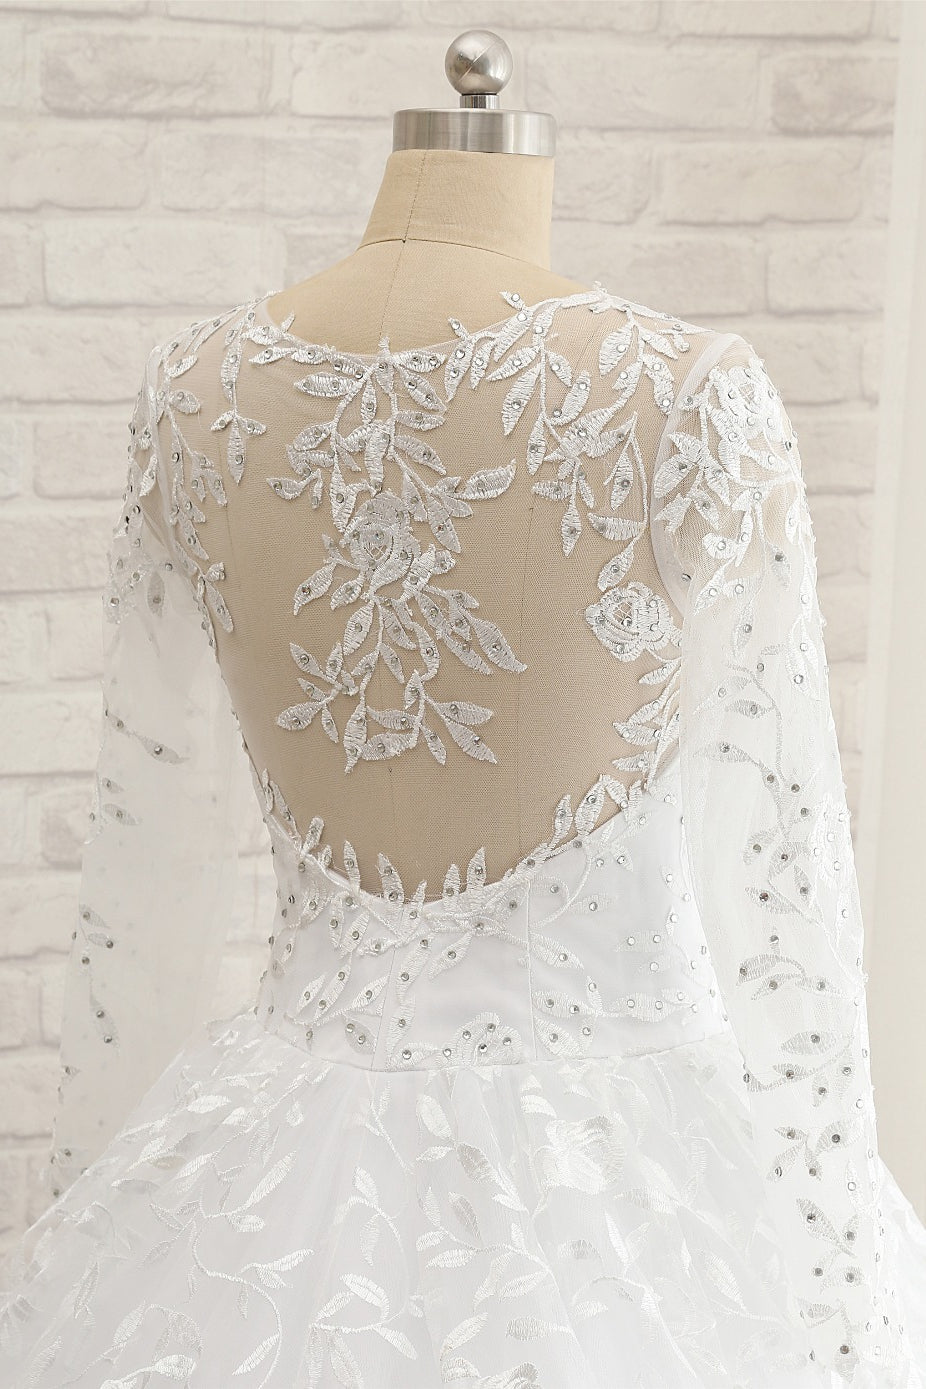 Load image into Gallery viewer, Elegant Jewel Longsleeves Lace Wedding Dresses White A-line Bridal Gowns With Appliques On Sale-27dress
